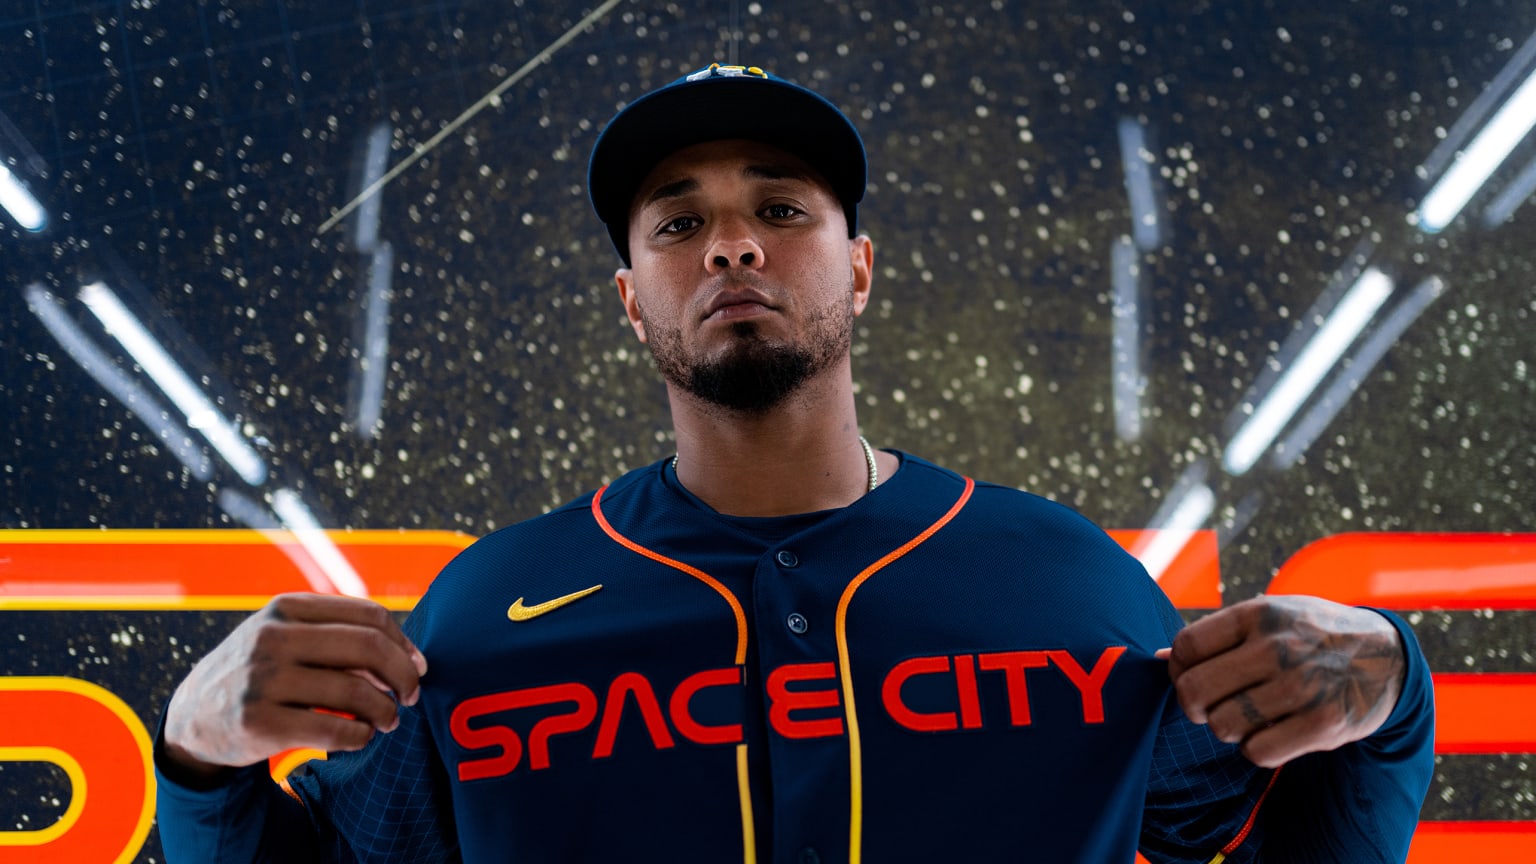 space city jersey